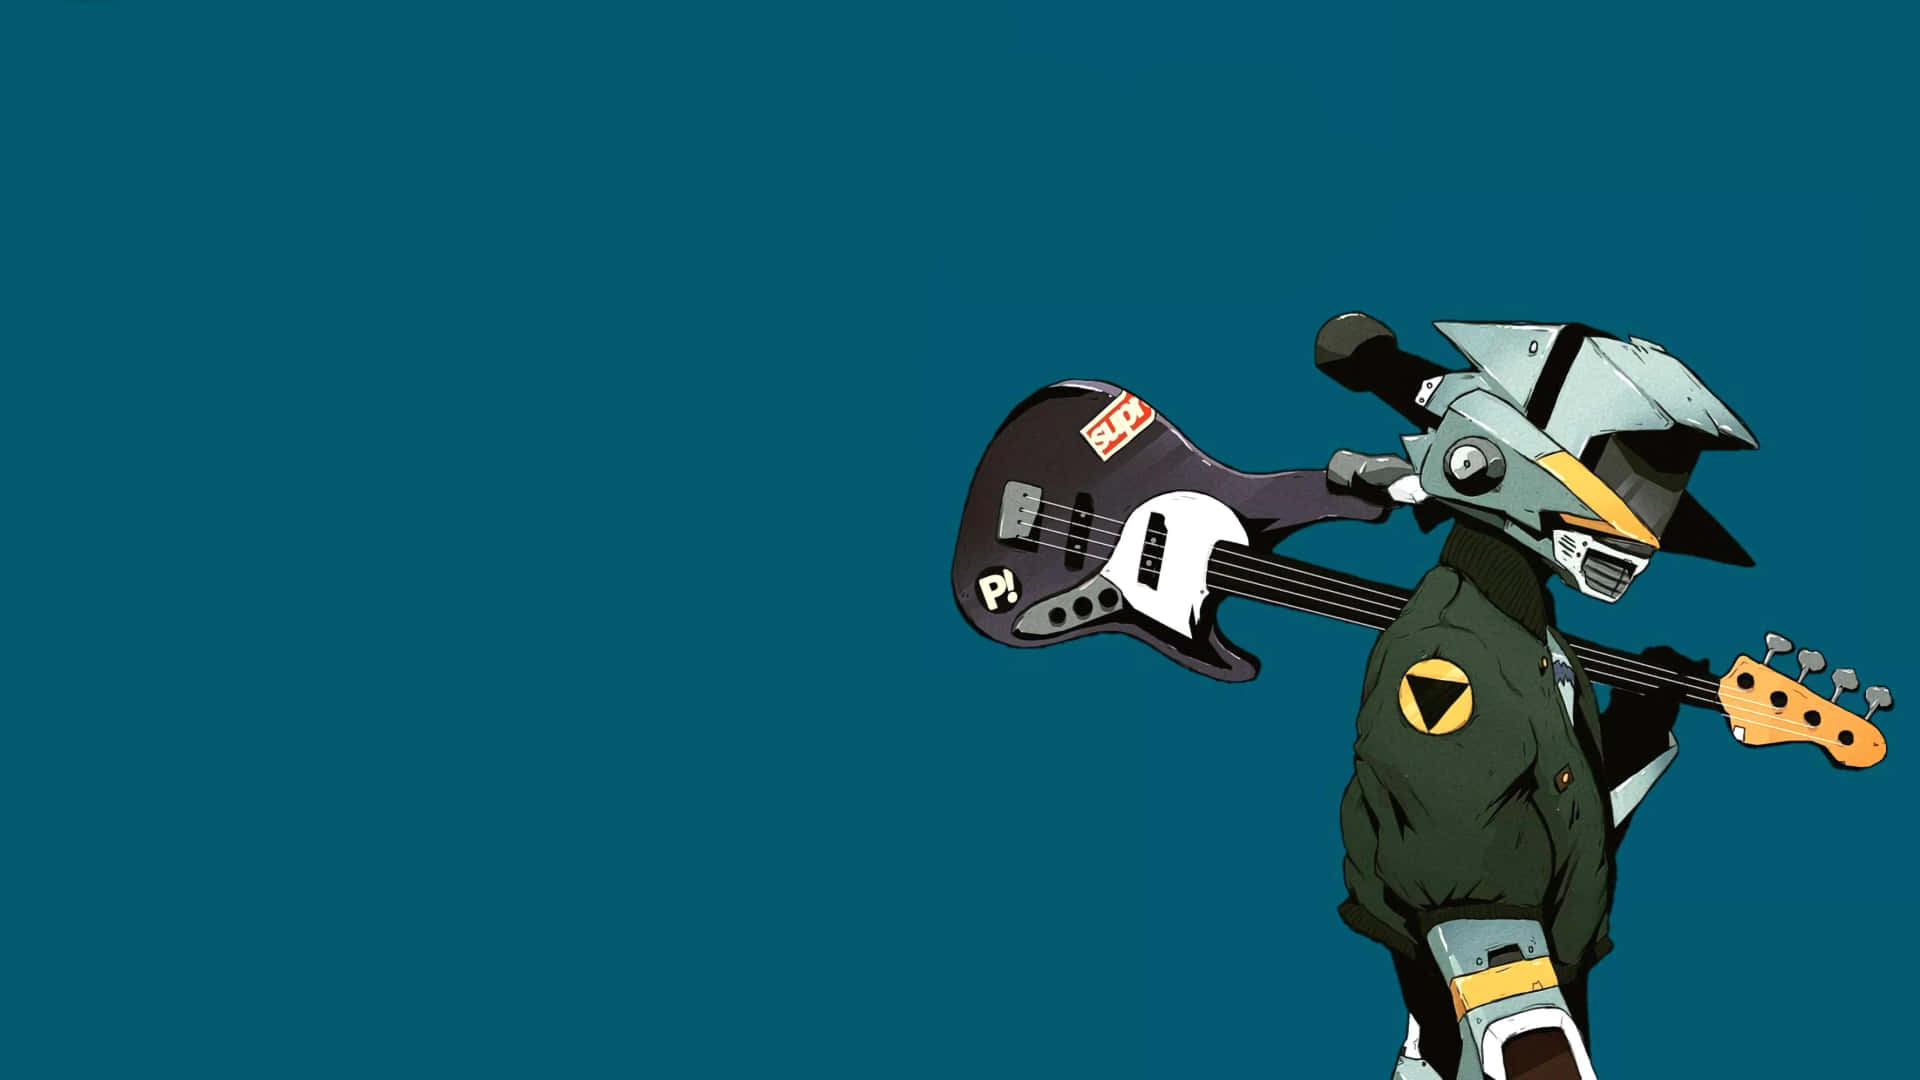 Canti, the enigmatic robot from FLCL anime series, striking a dynamic pose. Wallpaper